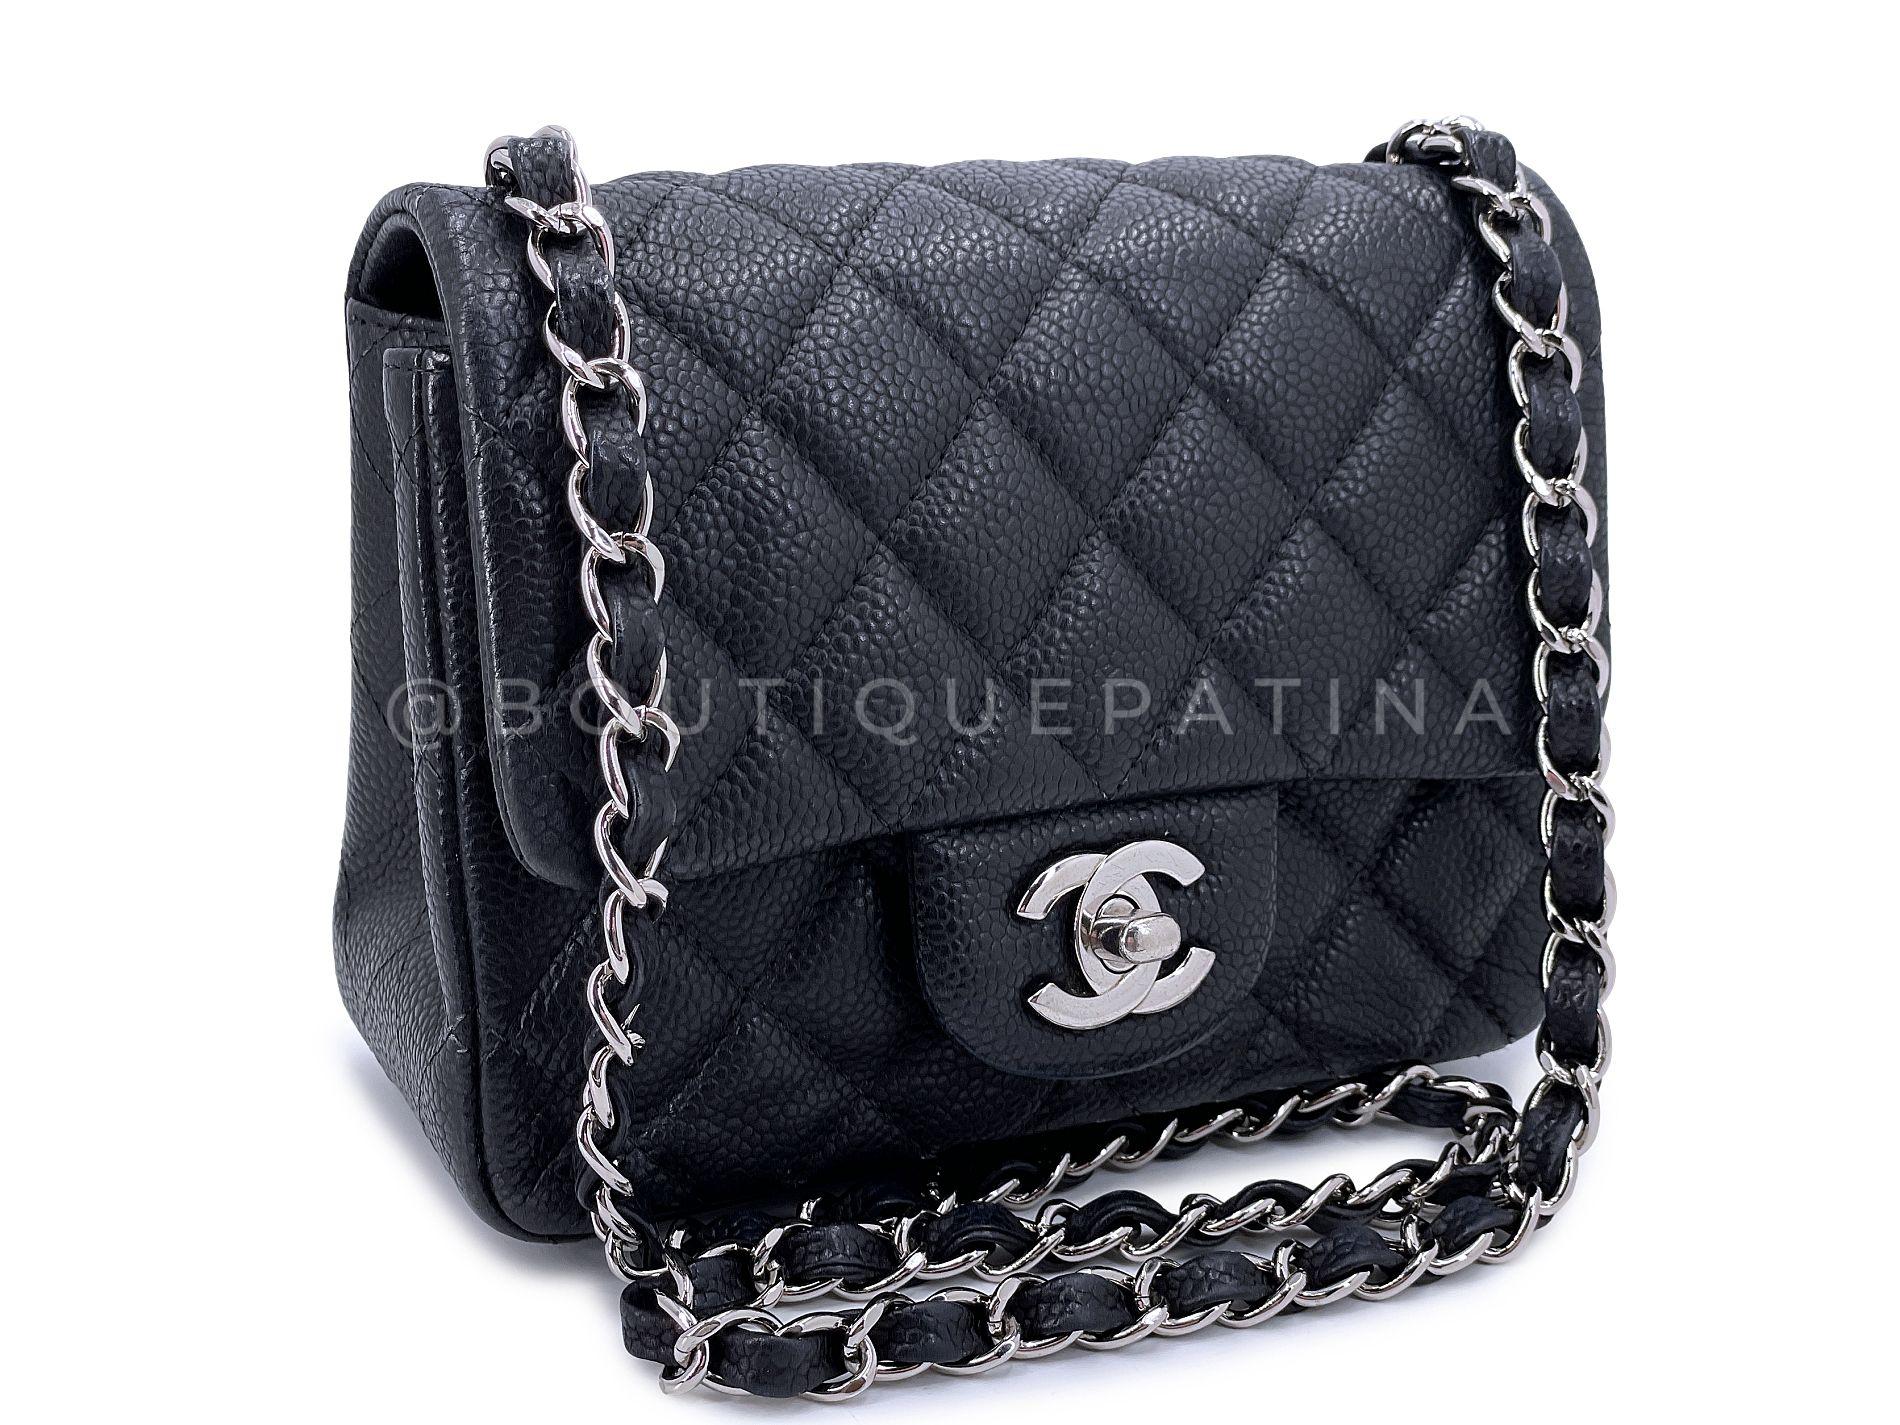 Store item: 68093
Long discontinued caviar square mini with silver hardware made in 2013 by Chanel.
The classic CC flap is the token iconic bag for the house of Chanel. This is a smaller version of the classic 2.55 flap, the classic mini flap, in a